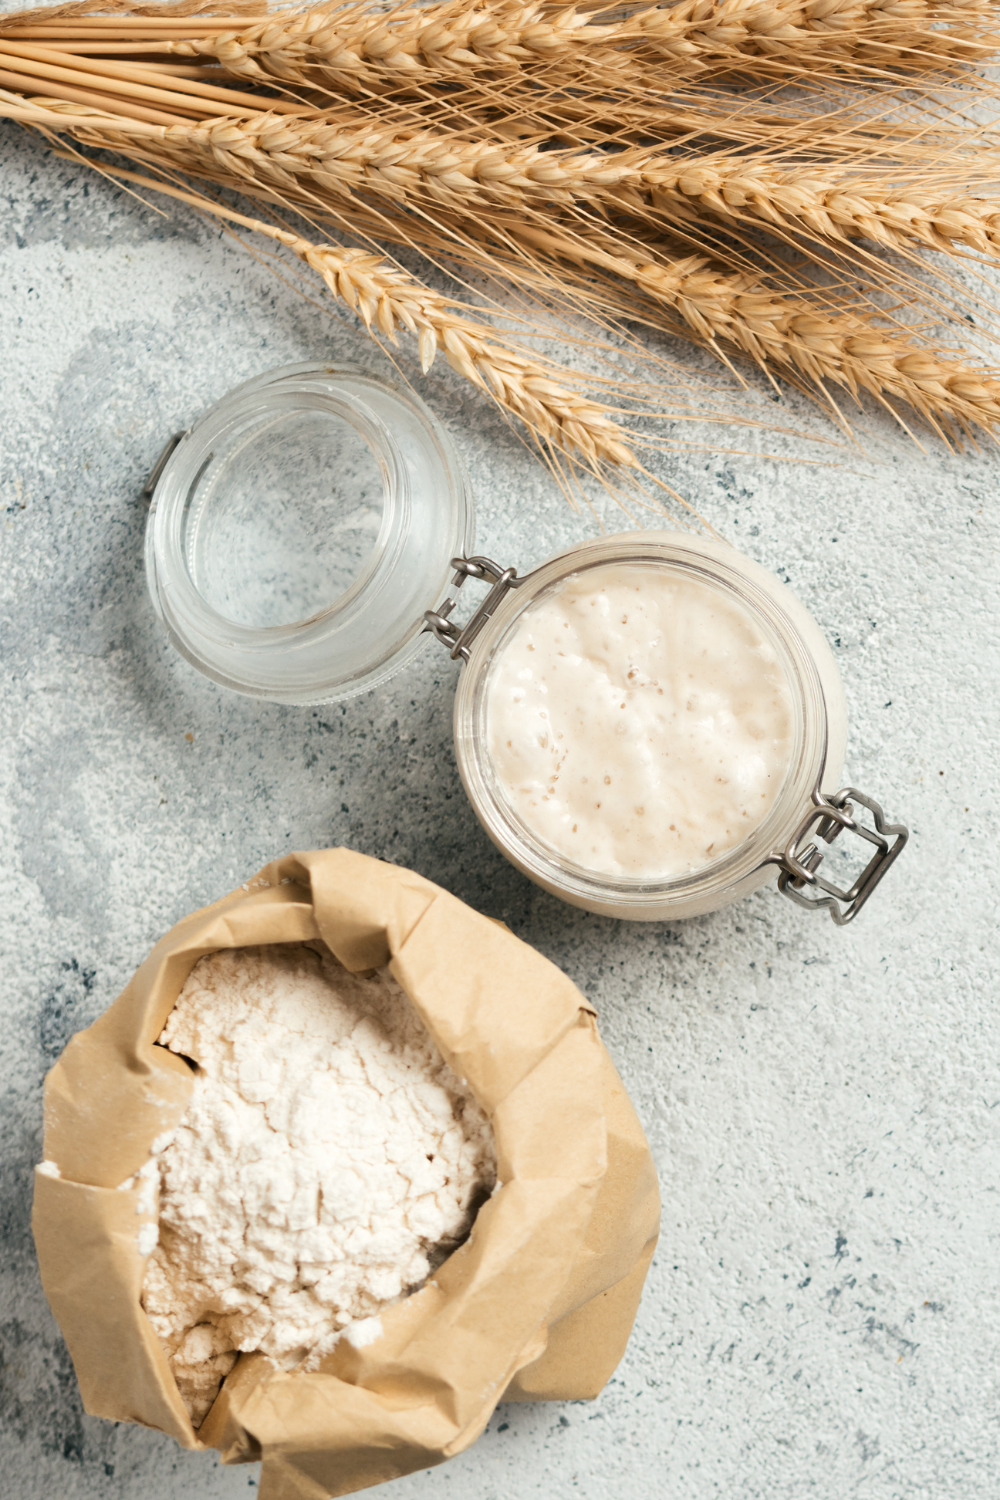 How To Feed Sourdough Starter